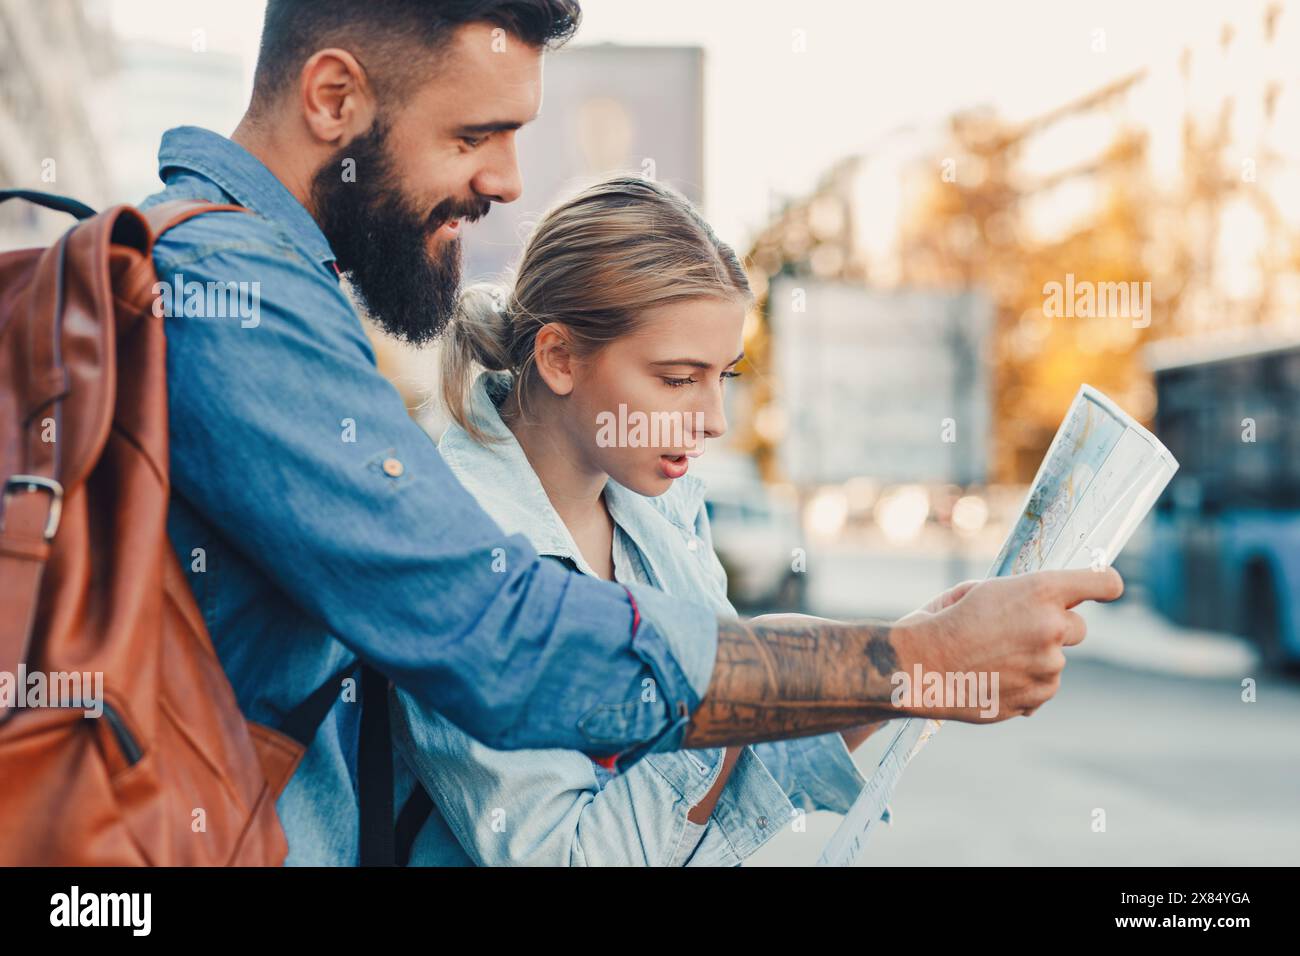 Smiling couple enjoying on vacation, young tourist having fun walking on city street looking at map for direction during the day. Stock Photo